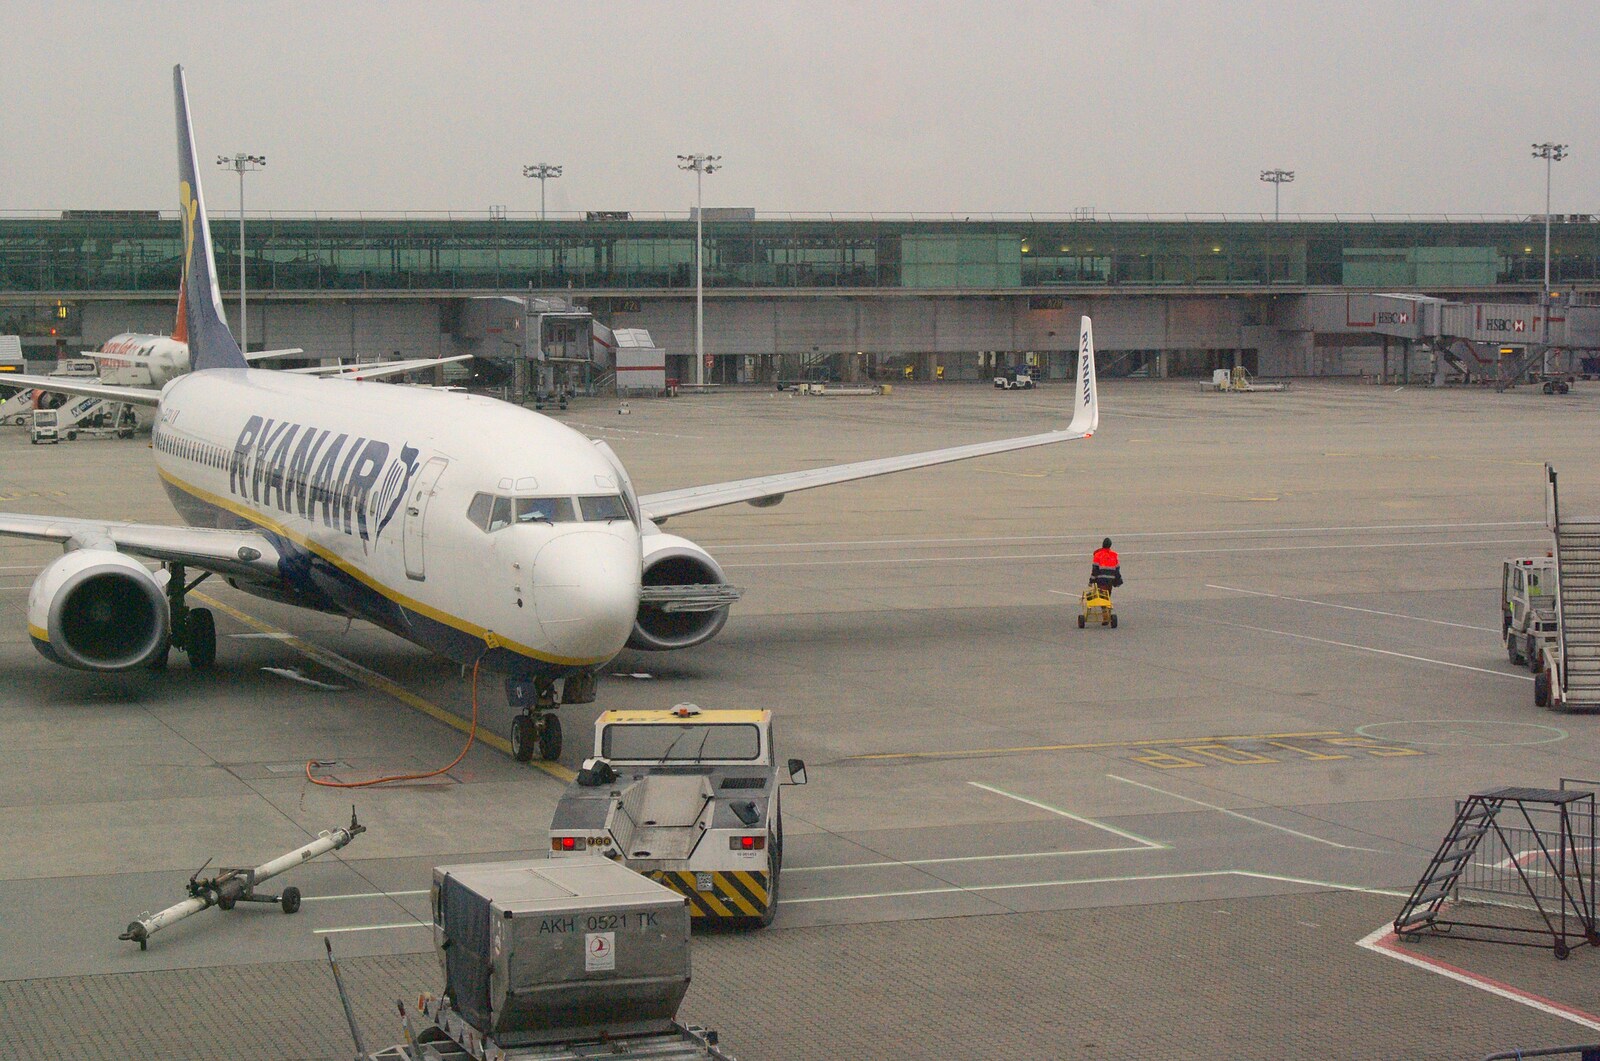 Our broken Ruinair 737-800 at Stansted from A Week in Monkstown, County Dublin, Ireland - 1st March 2011